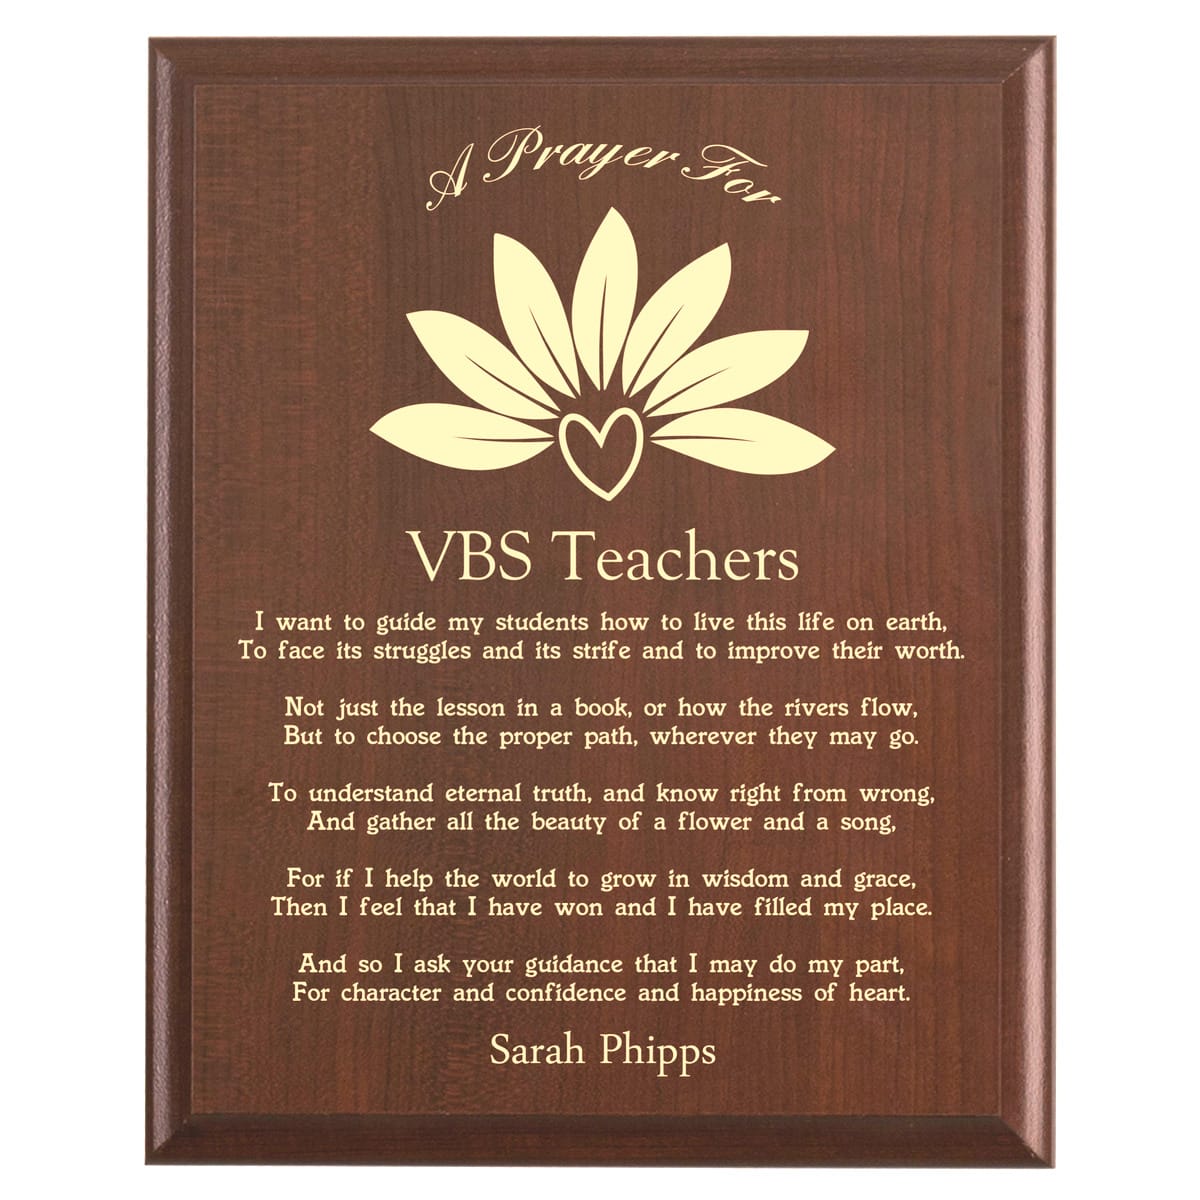 Plaque photo: Vacation Bible School Prayer Plaque design with free personalization. Wood style finish with customized text.